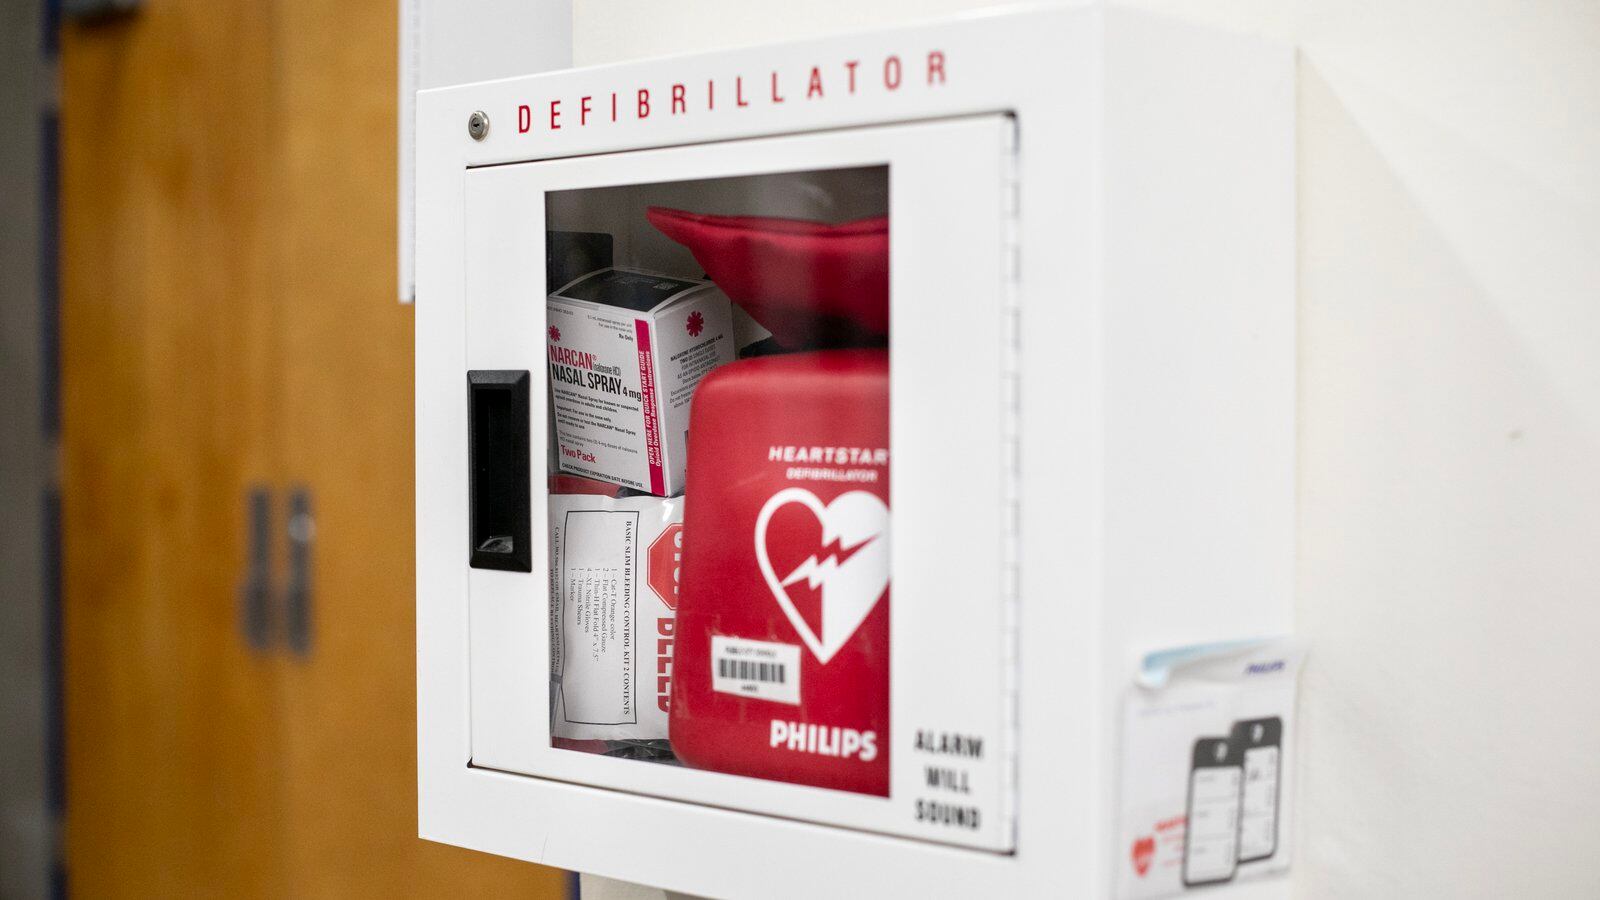 An emergency box mounted in the hallway of a building, containing a defibrillator and medications.